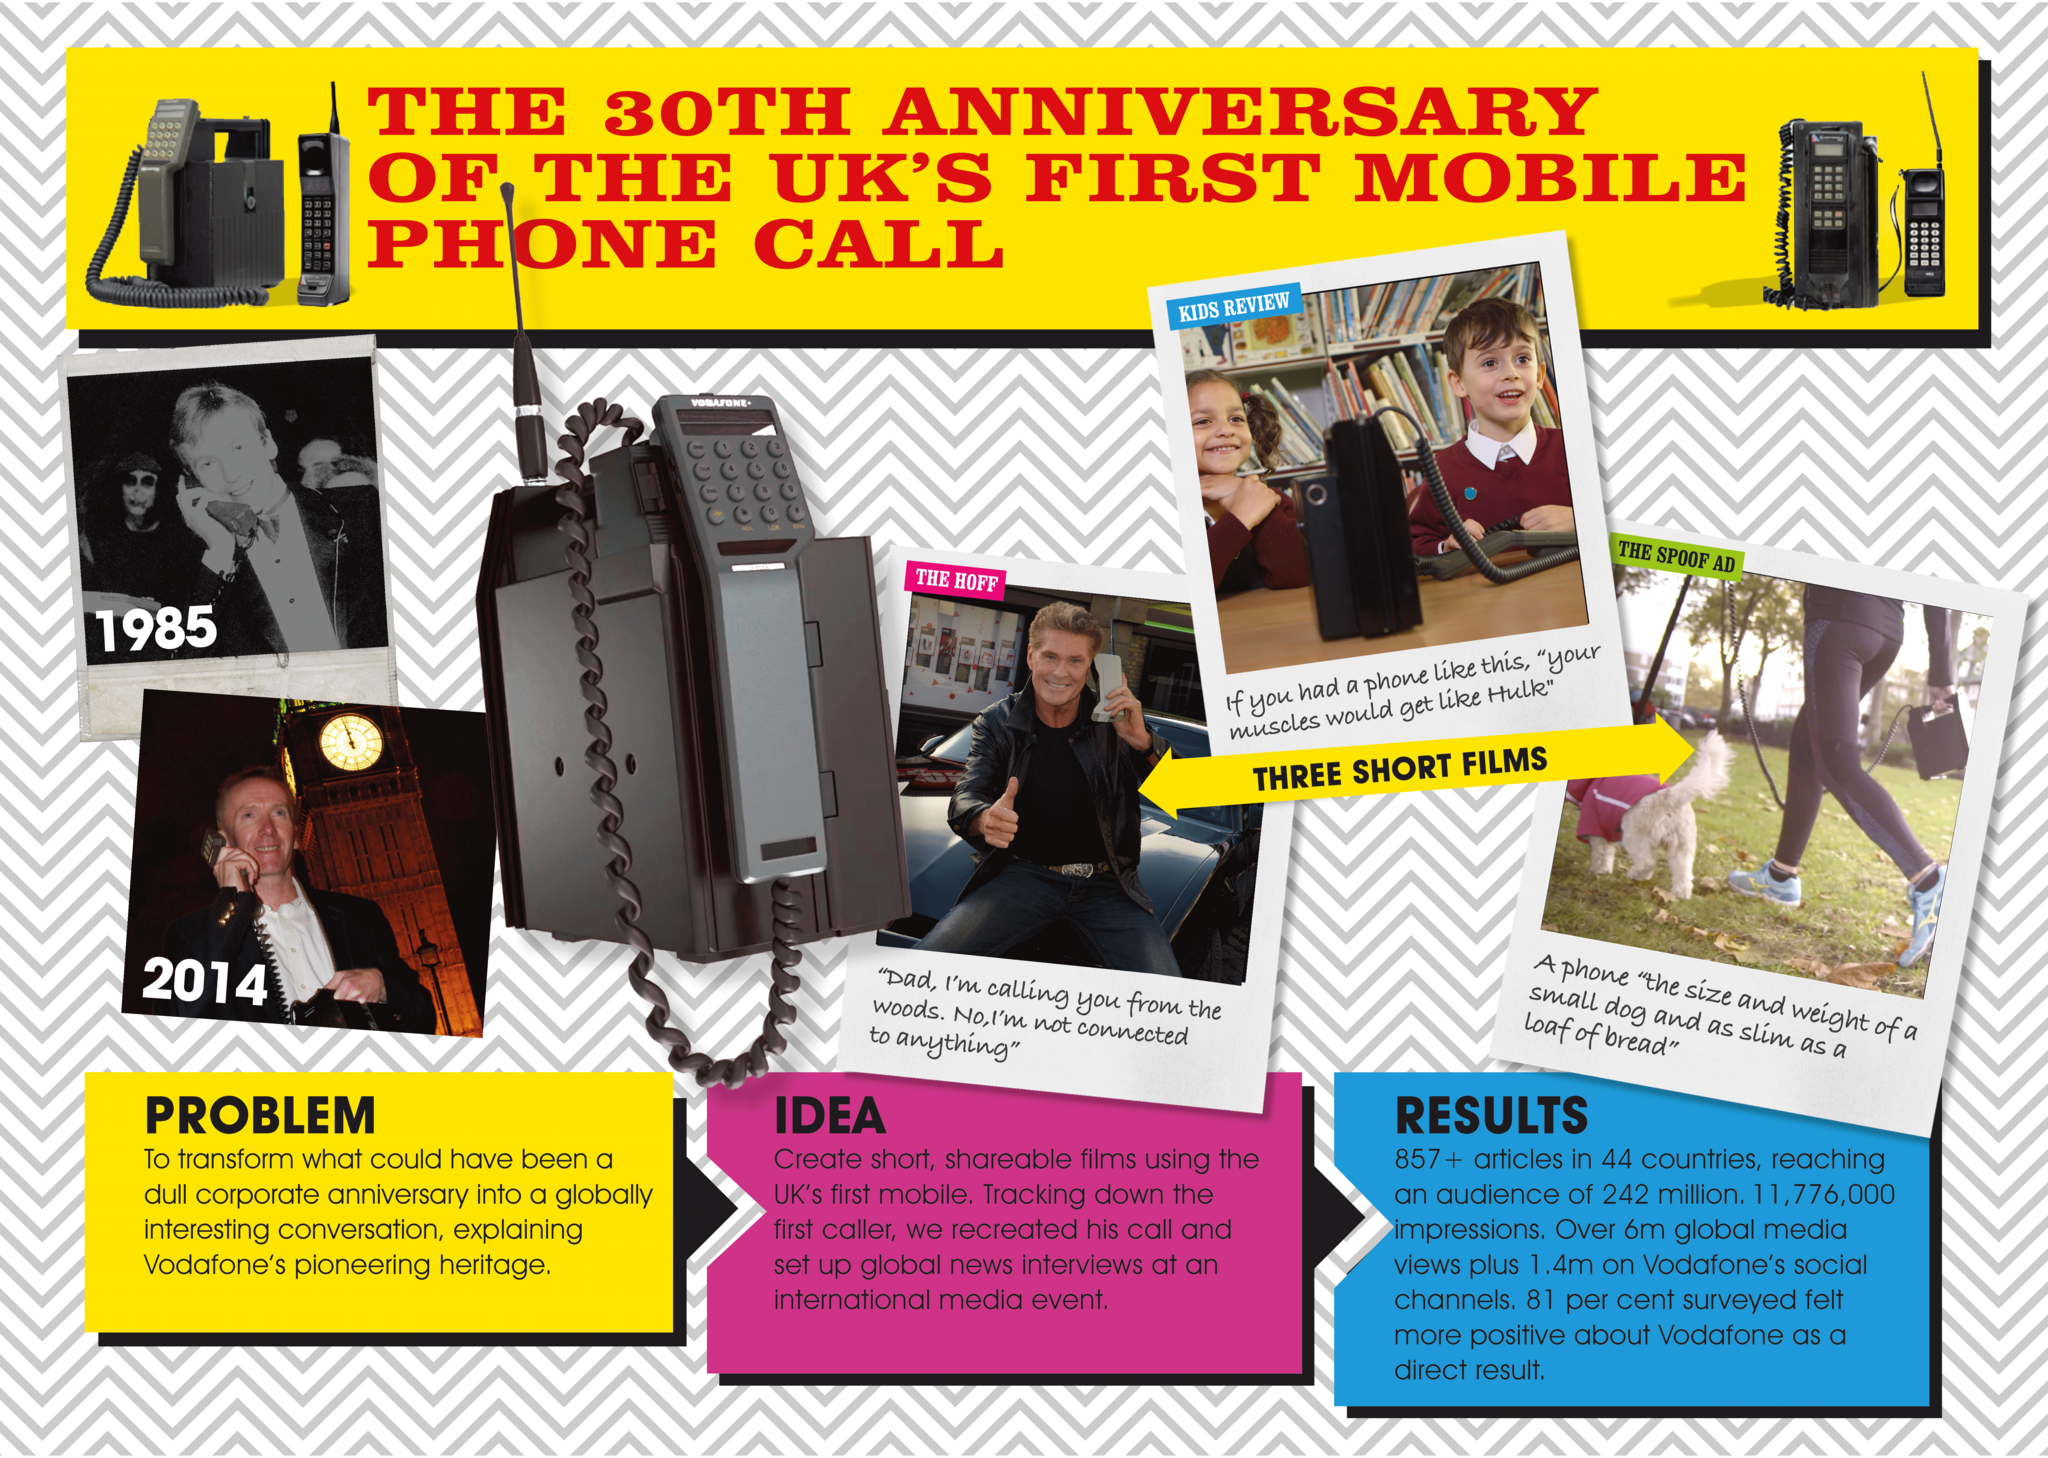 THE 30TH ANNIVERSARY OF THE UK'S FIRST MOBILE PHONE CALL